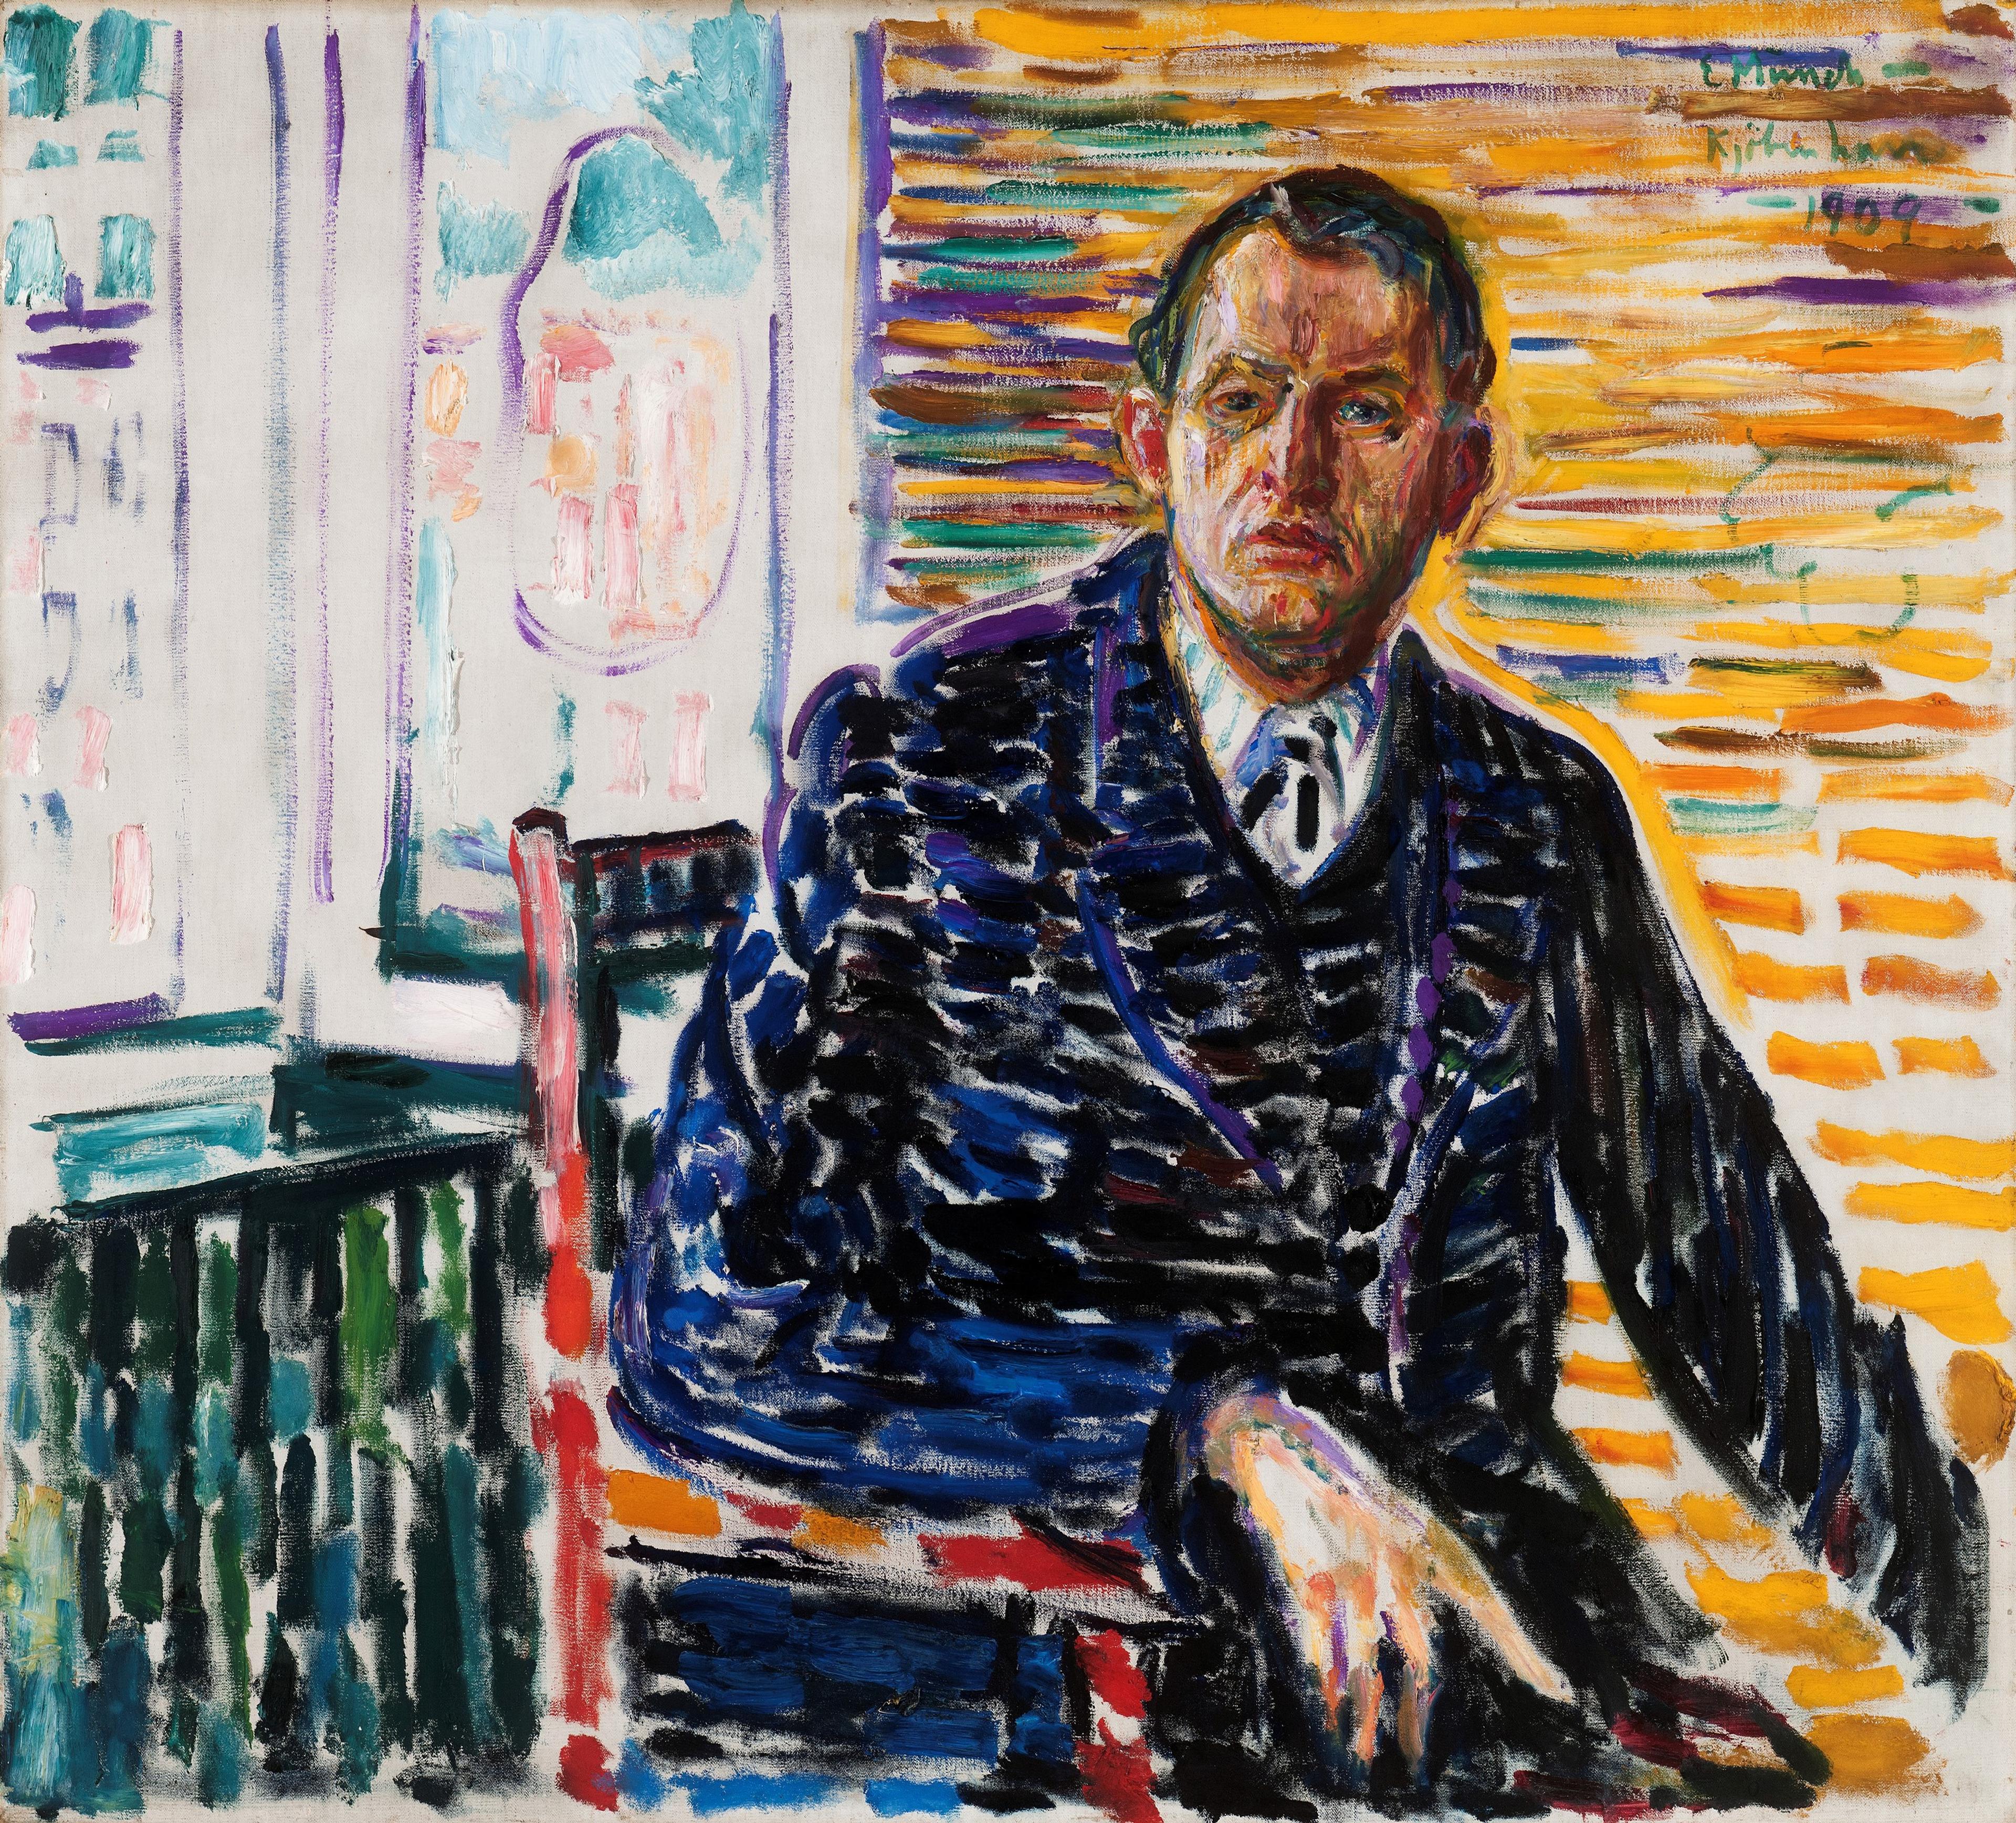 A colorful painting by Edvard Munch, depicting a self-portrait, where he is seated by a window.